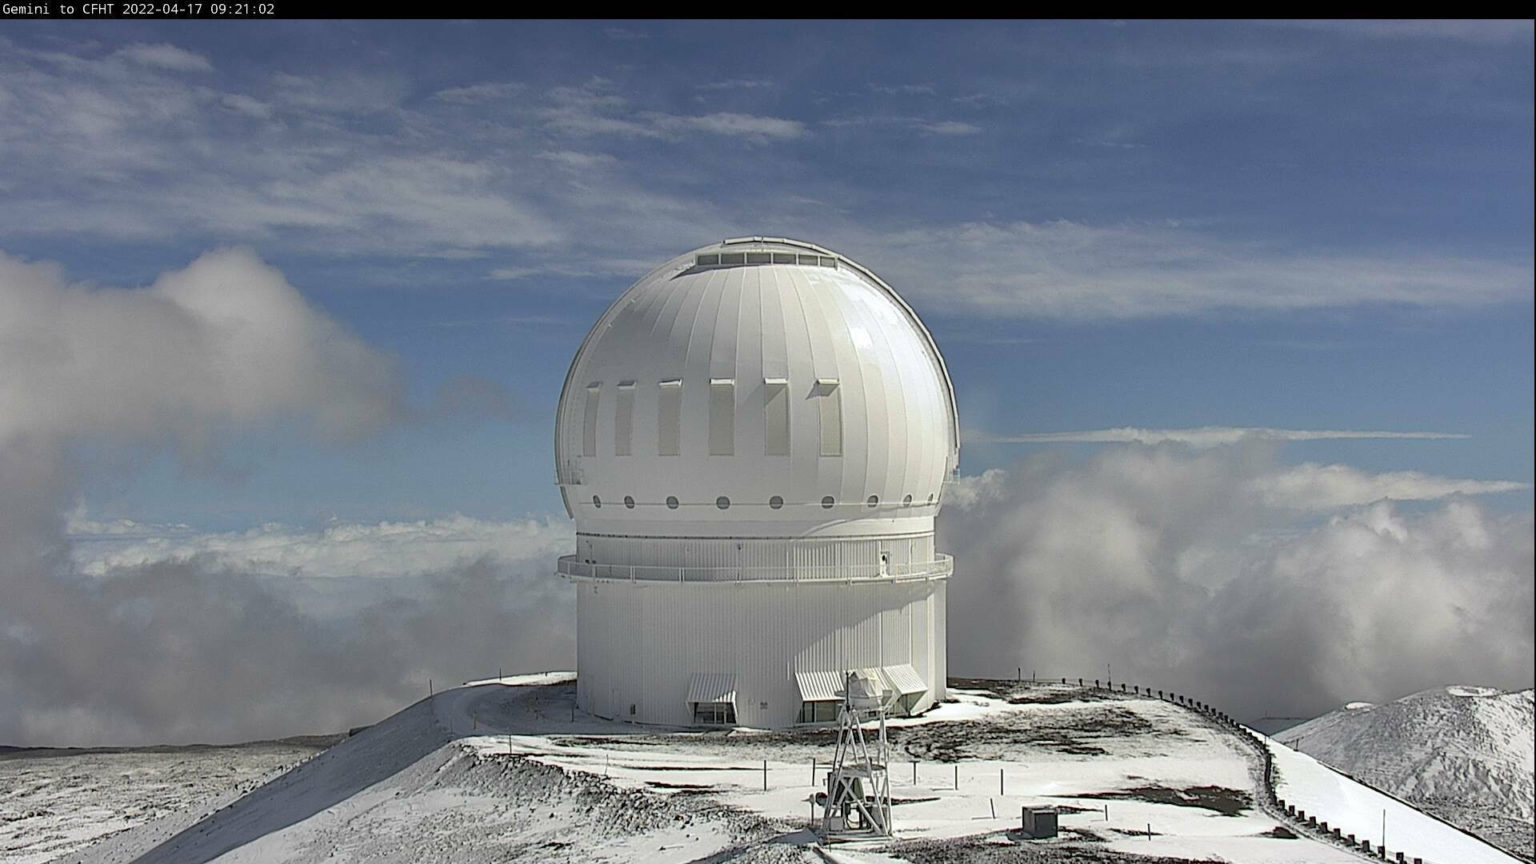 image of the snow from Canada-France-Hawaii Telescope webcam on Maunakea